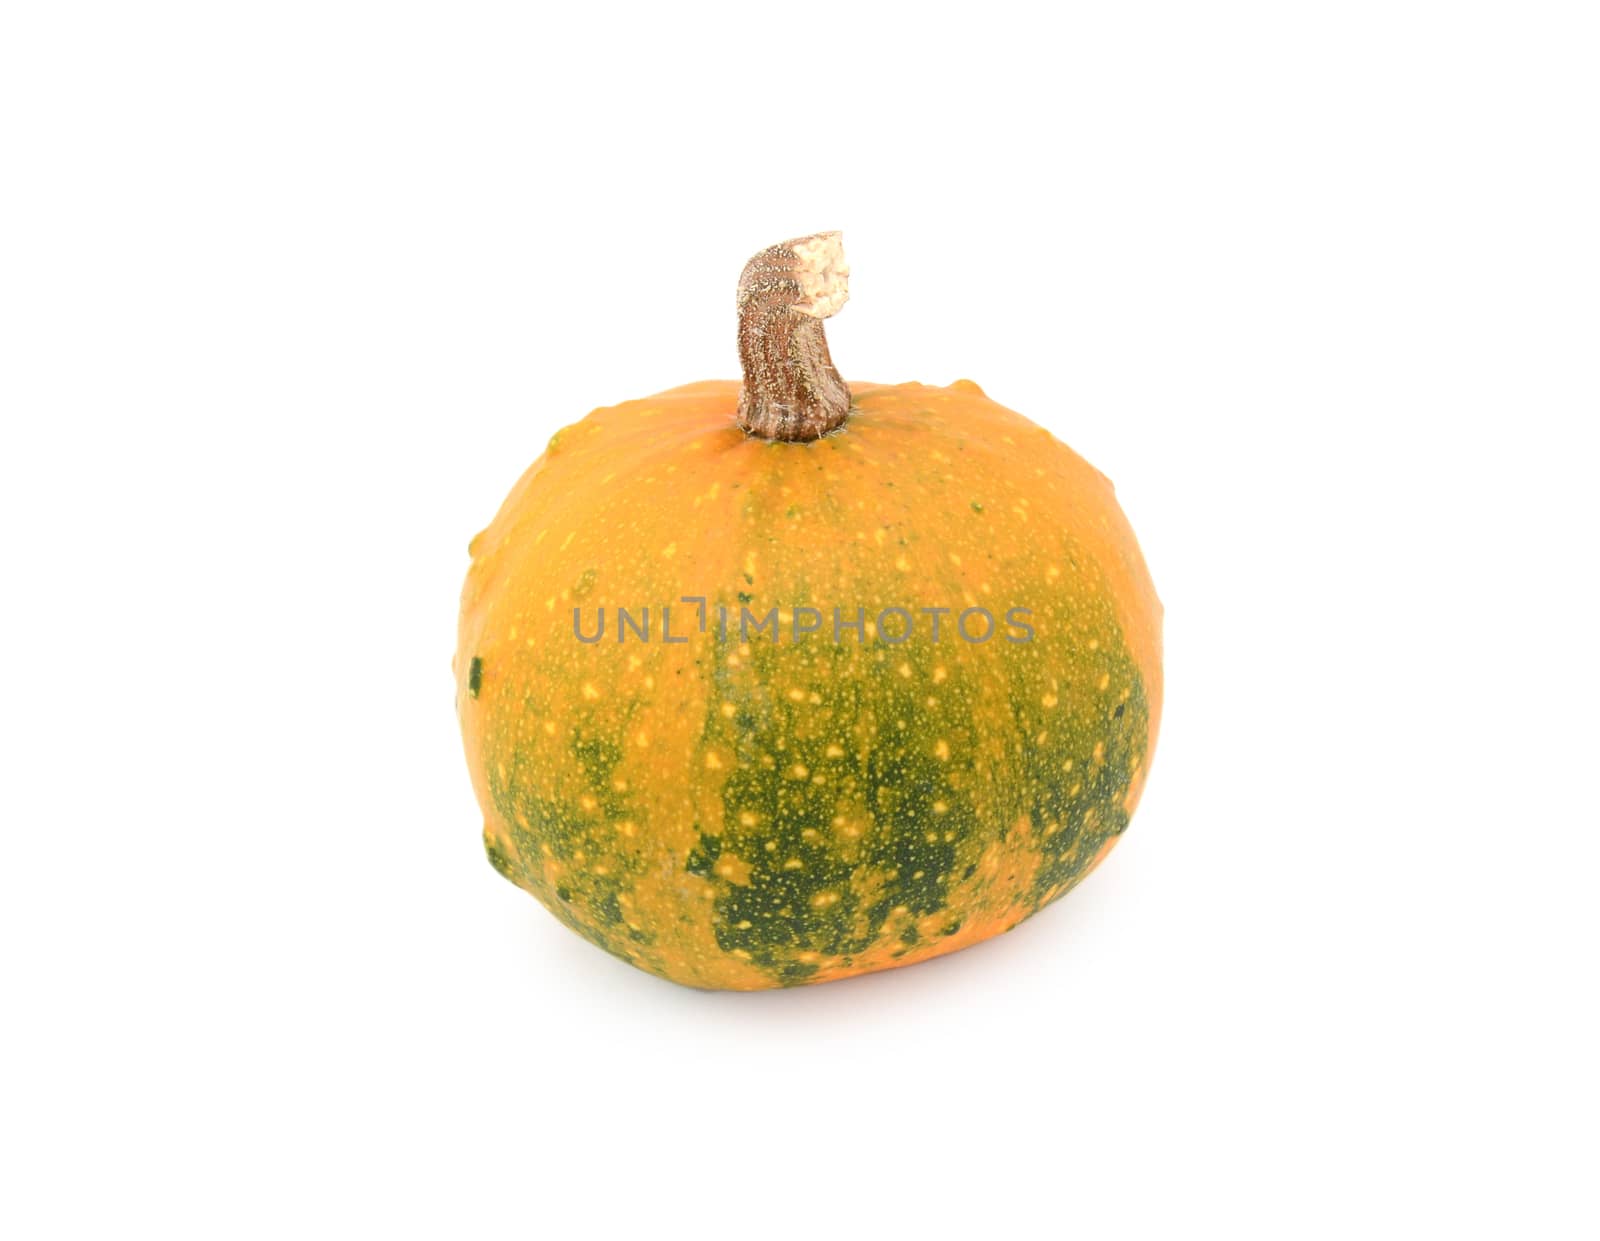 Ornamental gourd ripening from dark green to orange, on a white background